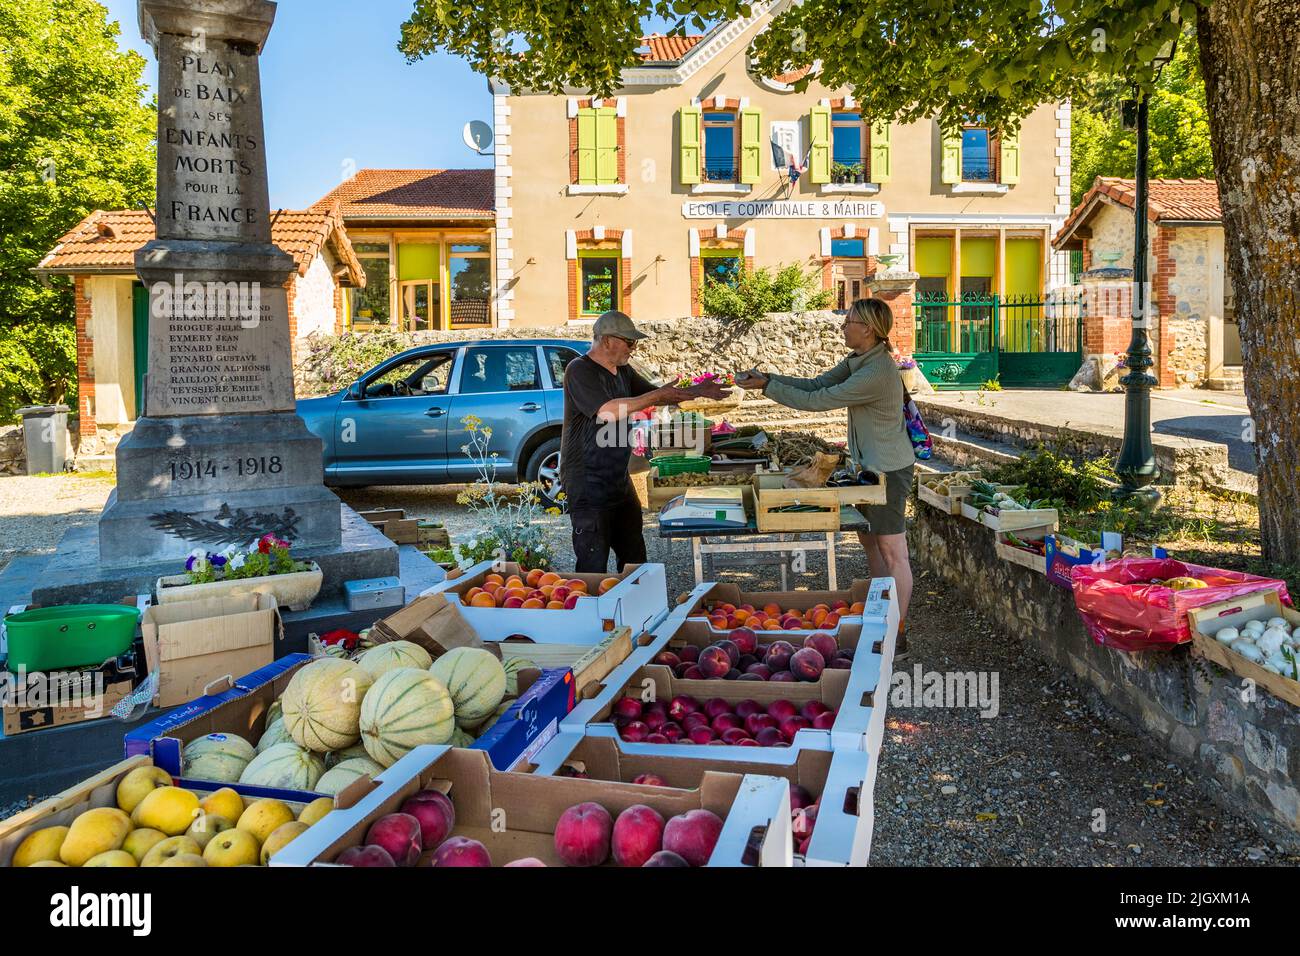 Weekly takes place the producer market in Plan-de-Baix (Die, France). Food writer Angela Berg shopping at one of the typical small weekly markets in a village in the Drôme valley Stock Photo